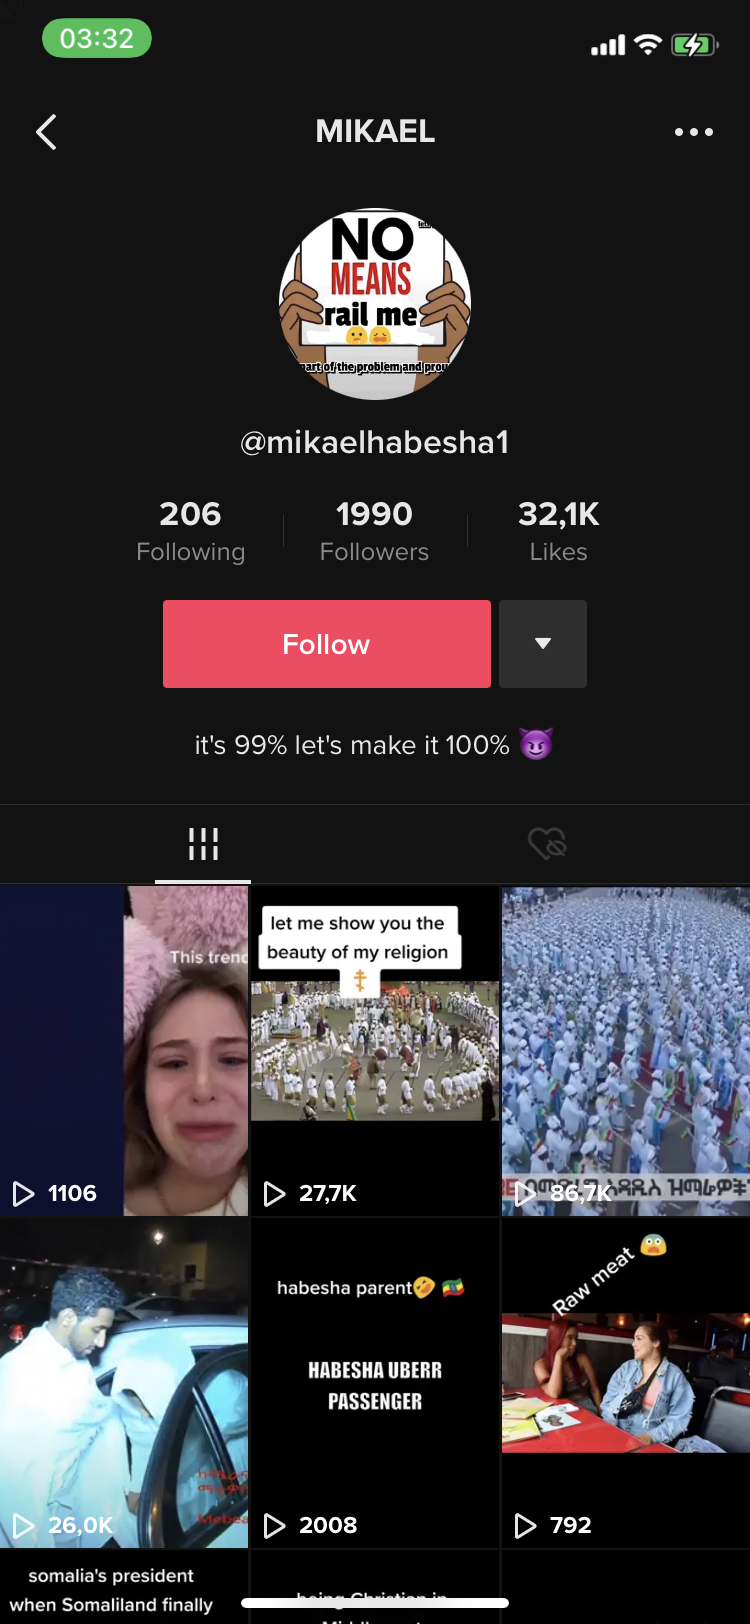 TikTok complaint Bullying and hate speech. Also offensive profile